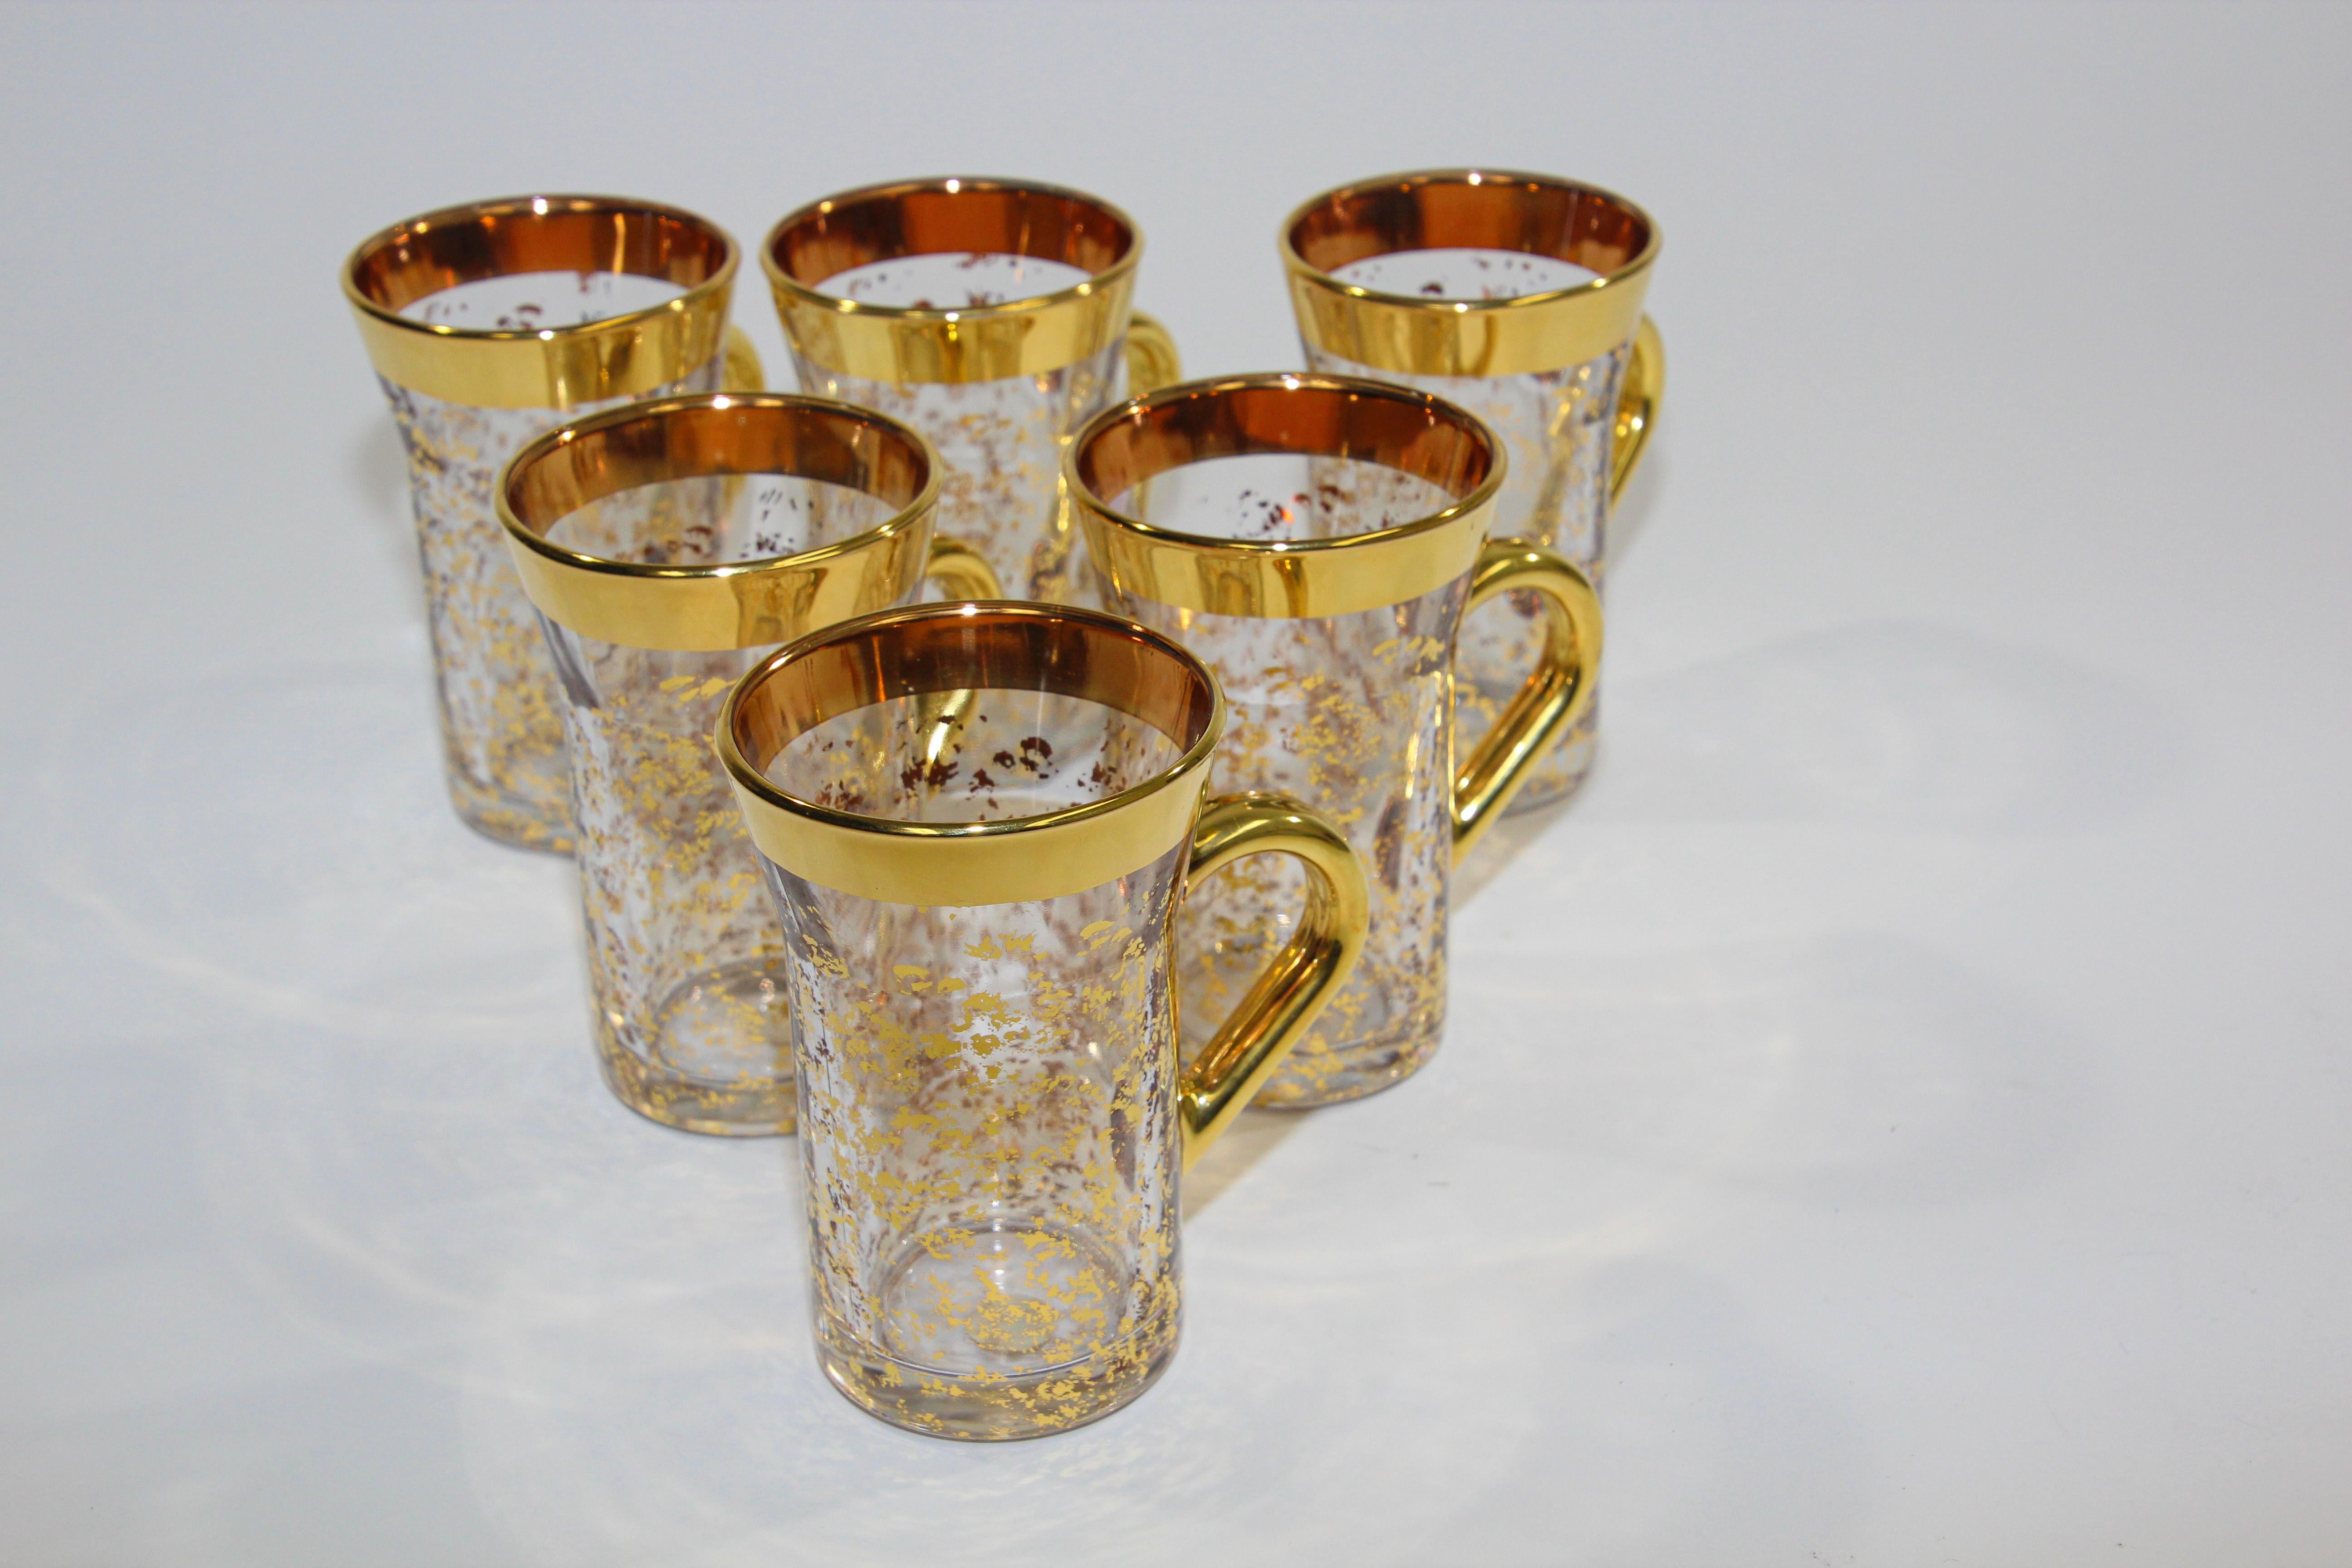 Set of 6 vintage clear handled Middle Eastern style Turkish coffee mugs or tea glasses hand painted with 24K gold rim and gold flecks overlay enameled design.
6 vintage lavorato a mano Italian gold handled barware glasses, espresso glasses, tea